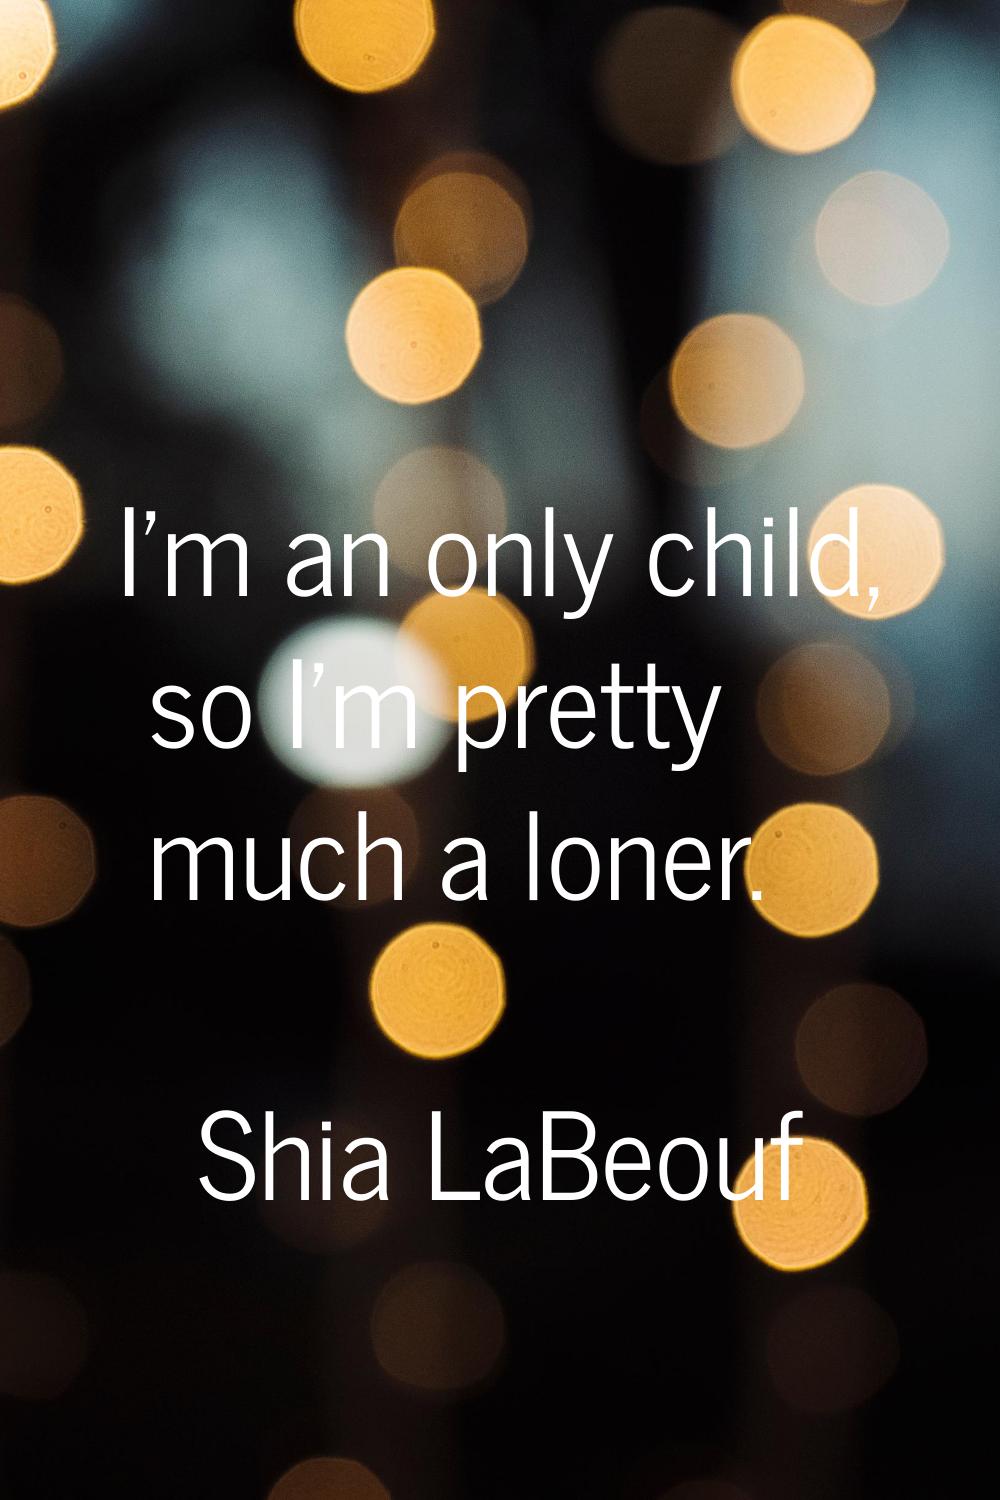 I'm an only child, so I'm pretty much a loner.